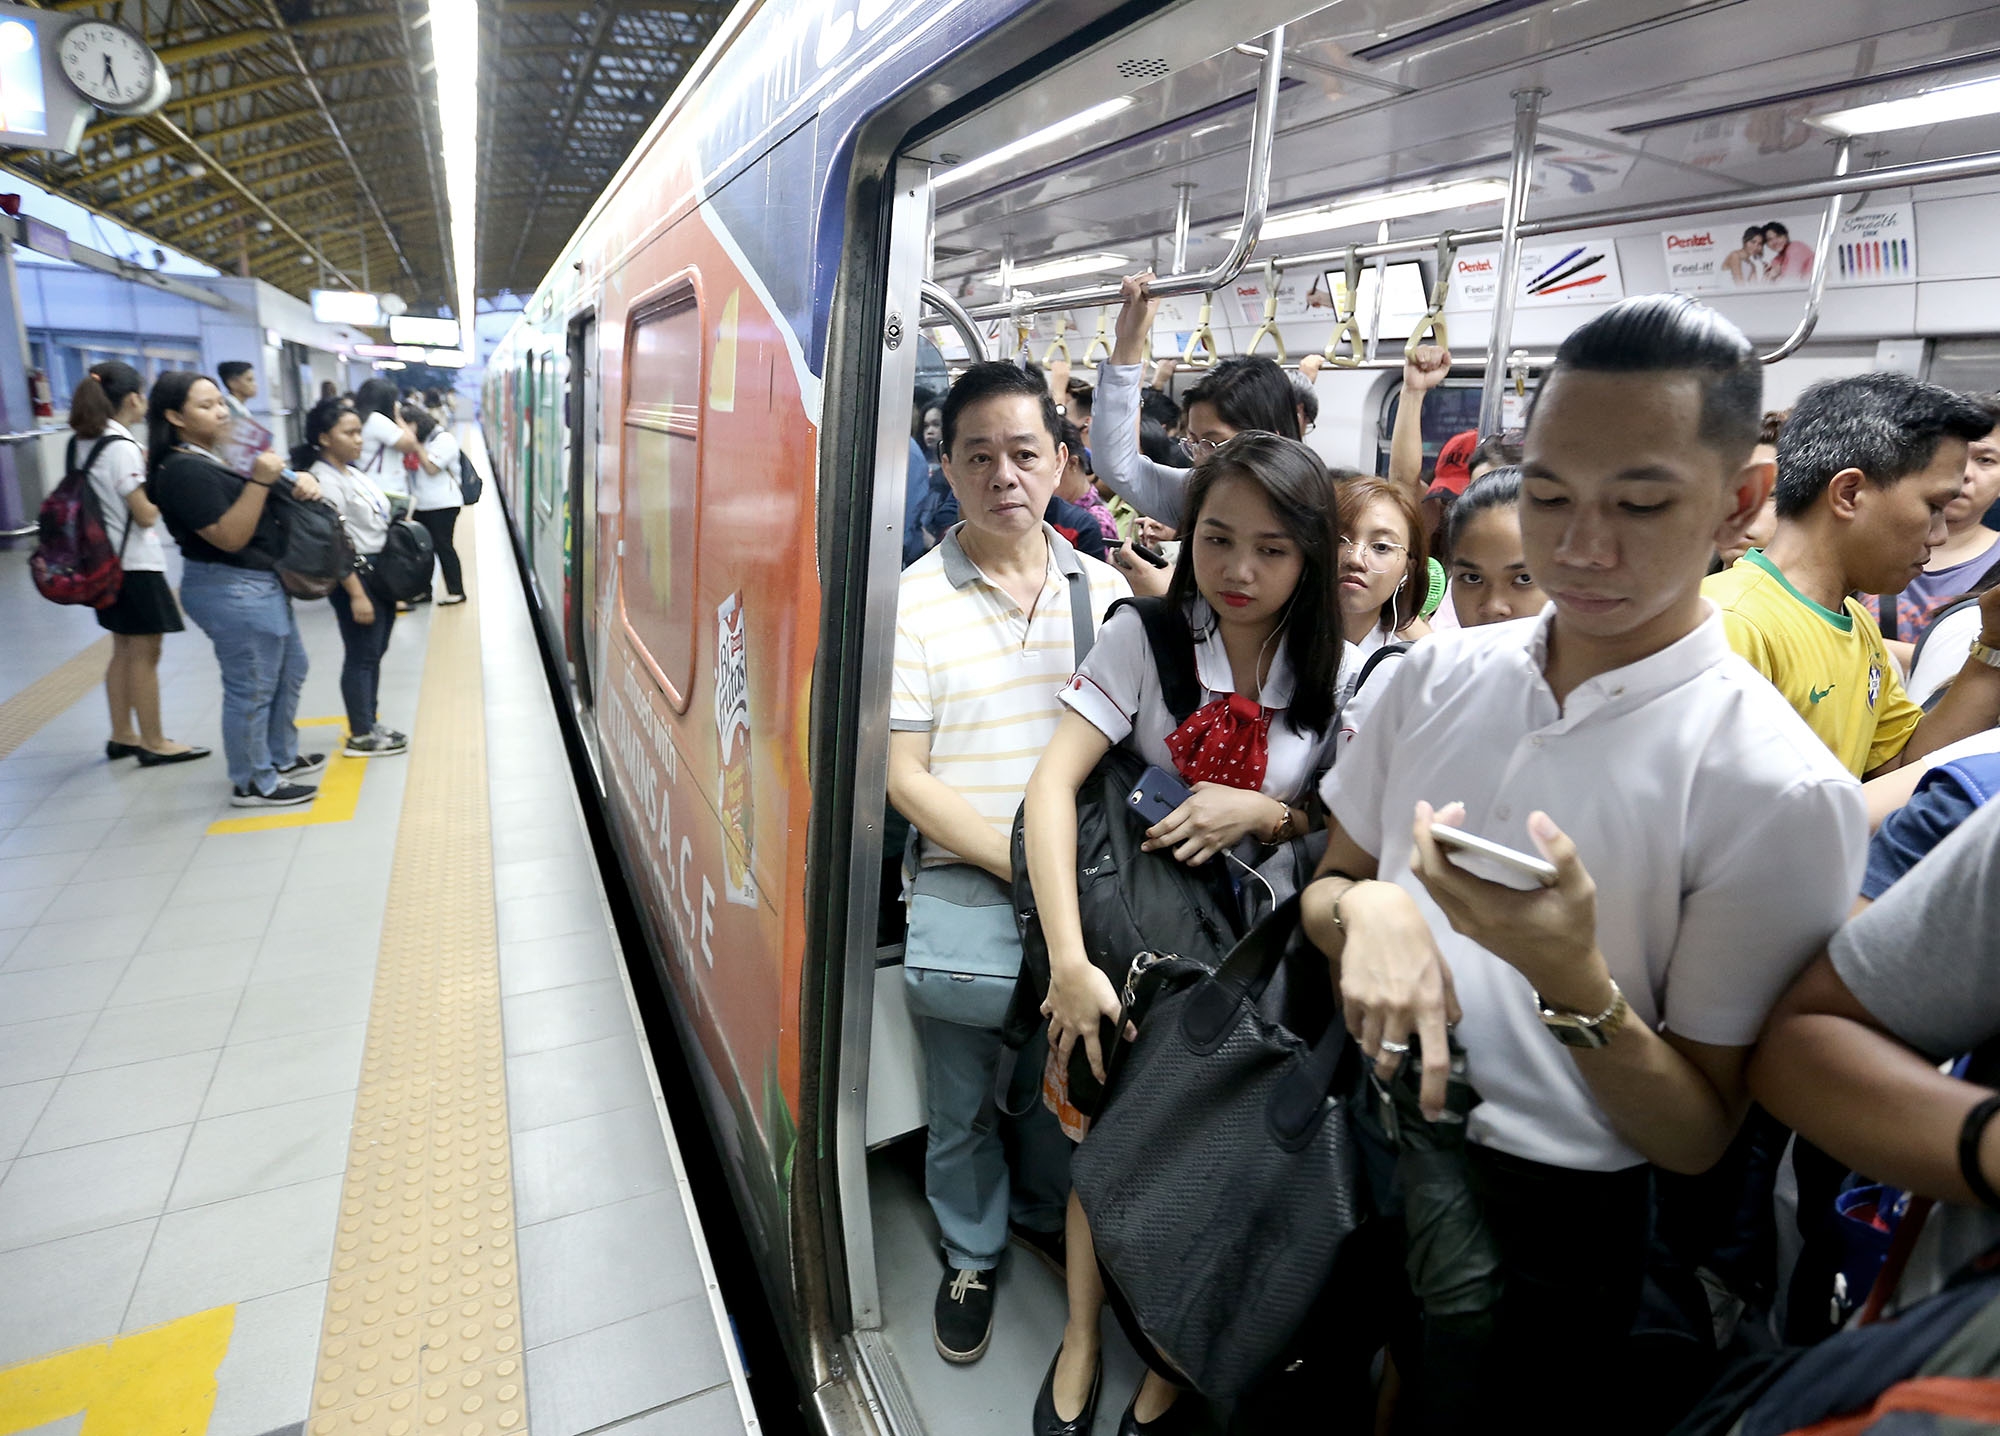 Students’ perks: Free train rides at certain hours, no terminal fees